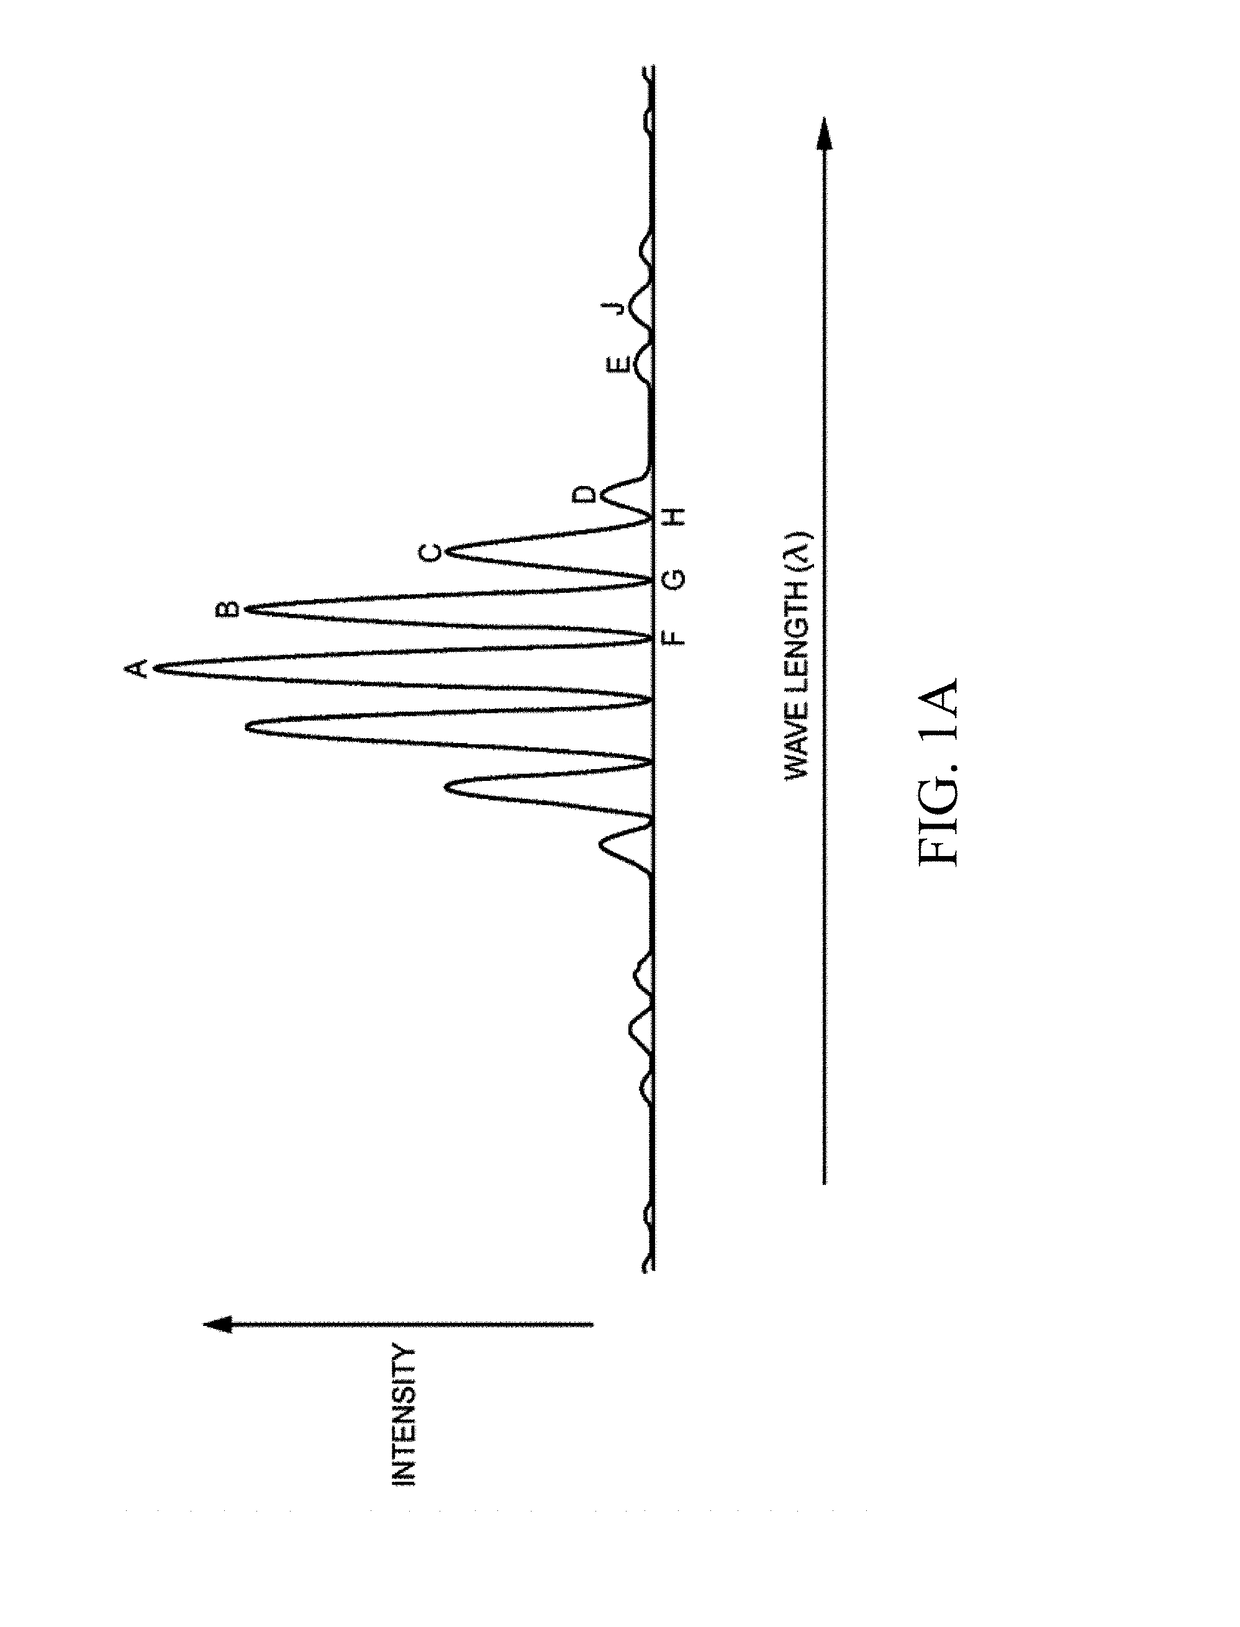 Submersible N-wavelength interrogation system and method for multiple wavelength interferometers